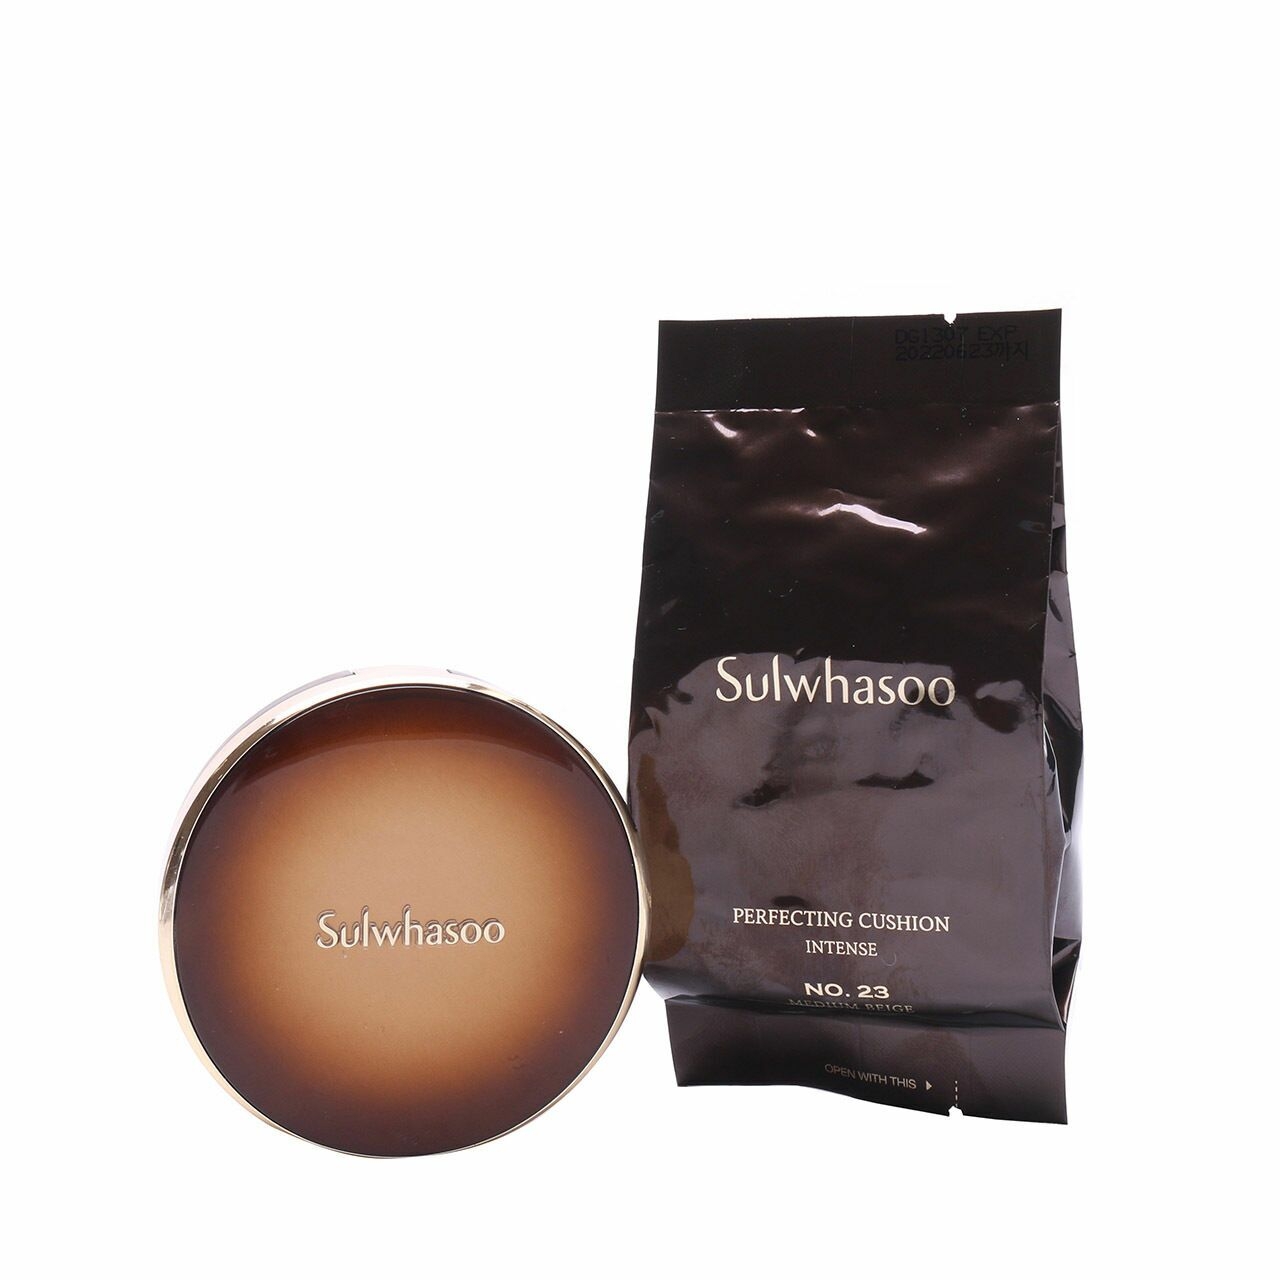 Sulwhasoo Perfecting Cushion Intense 23 Faces